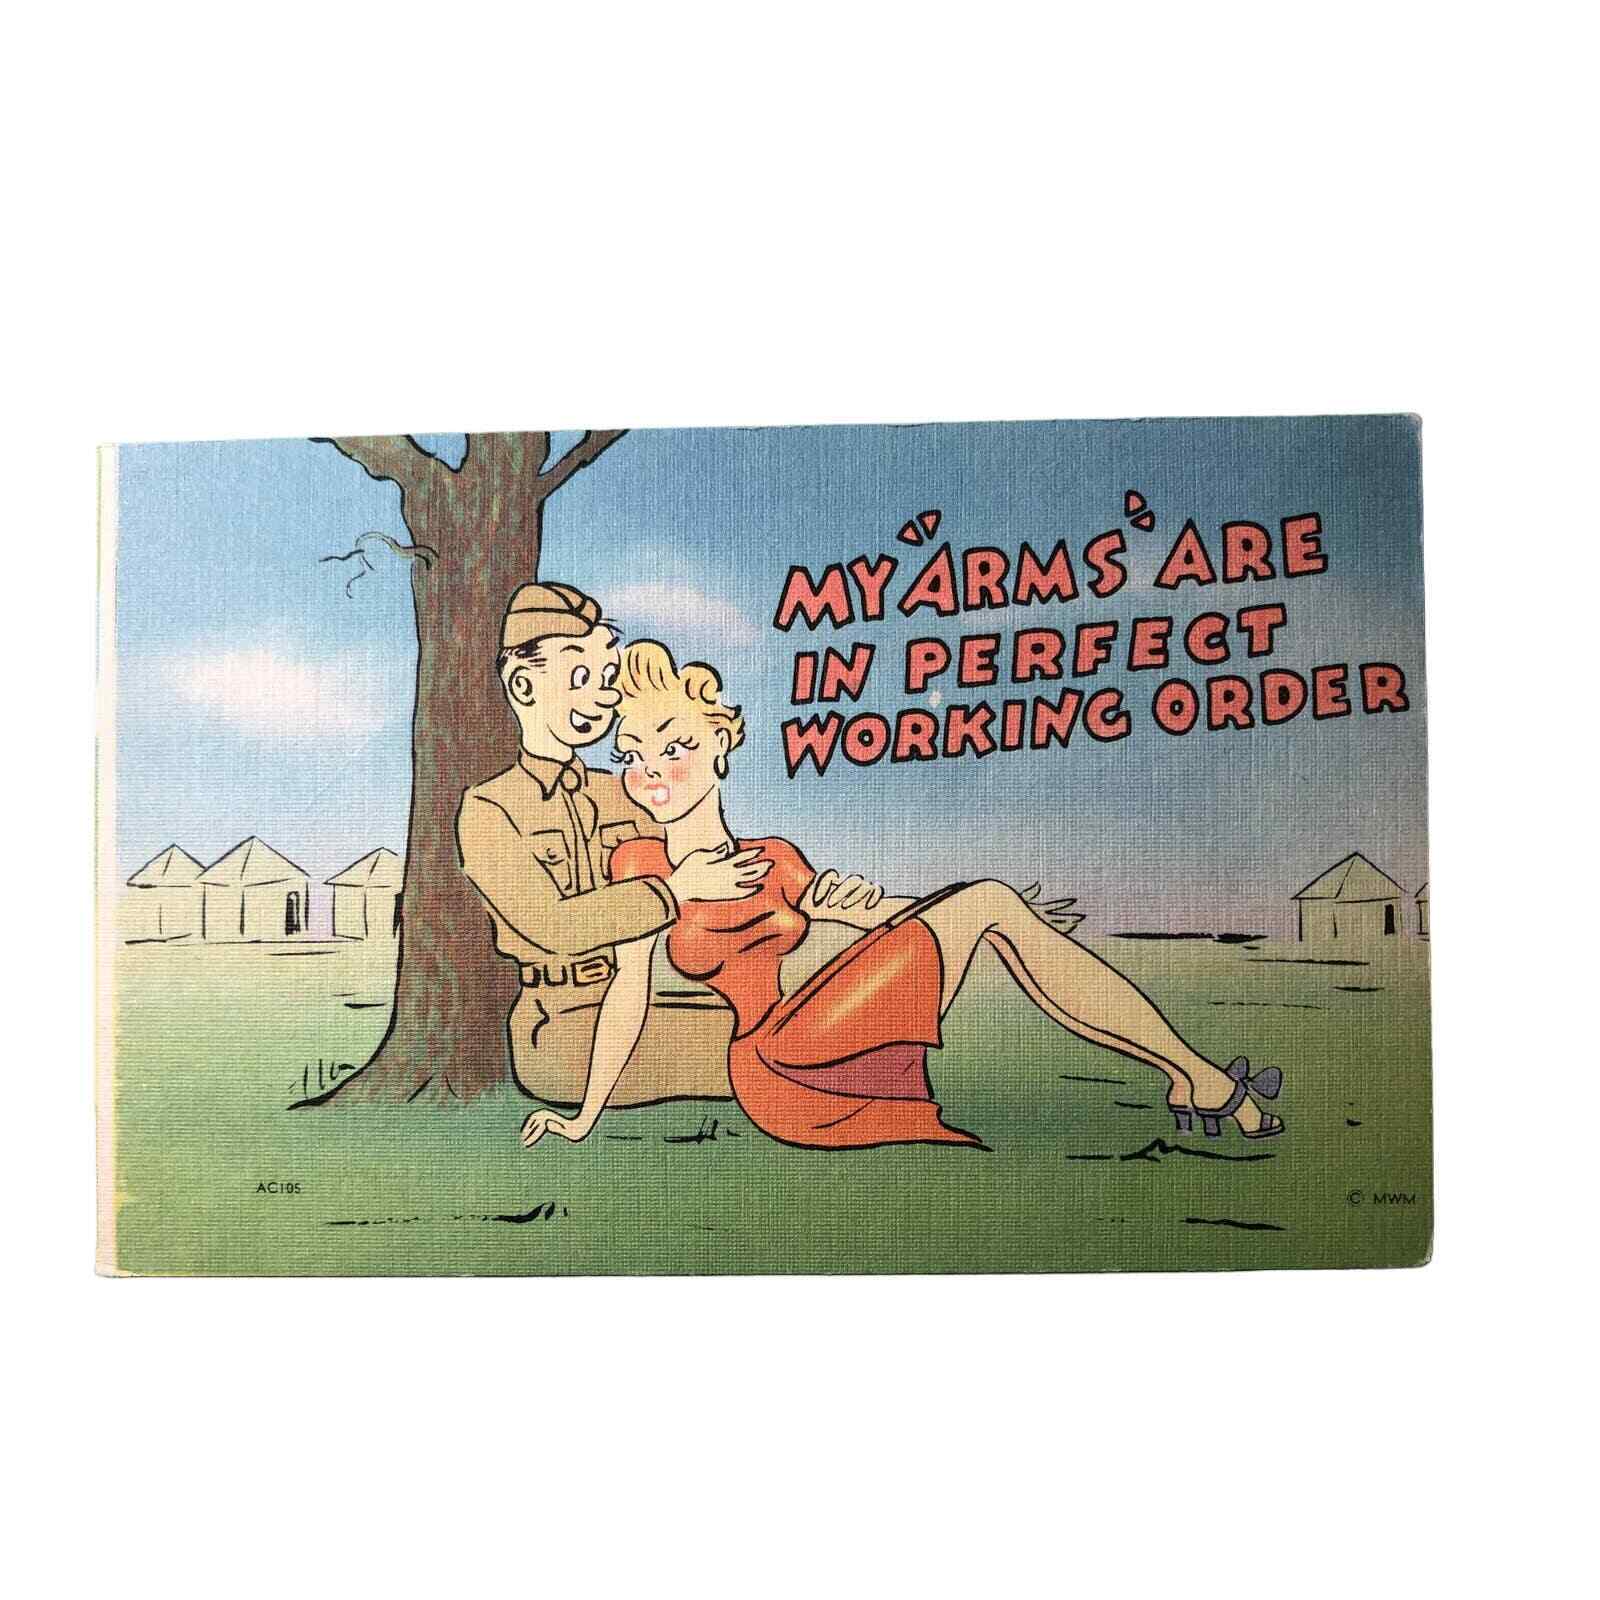 My Arms Are In Perfect Working Order Postcard Military Humor 1940's vn